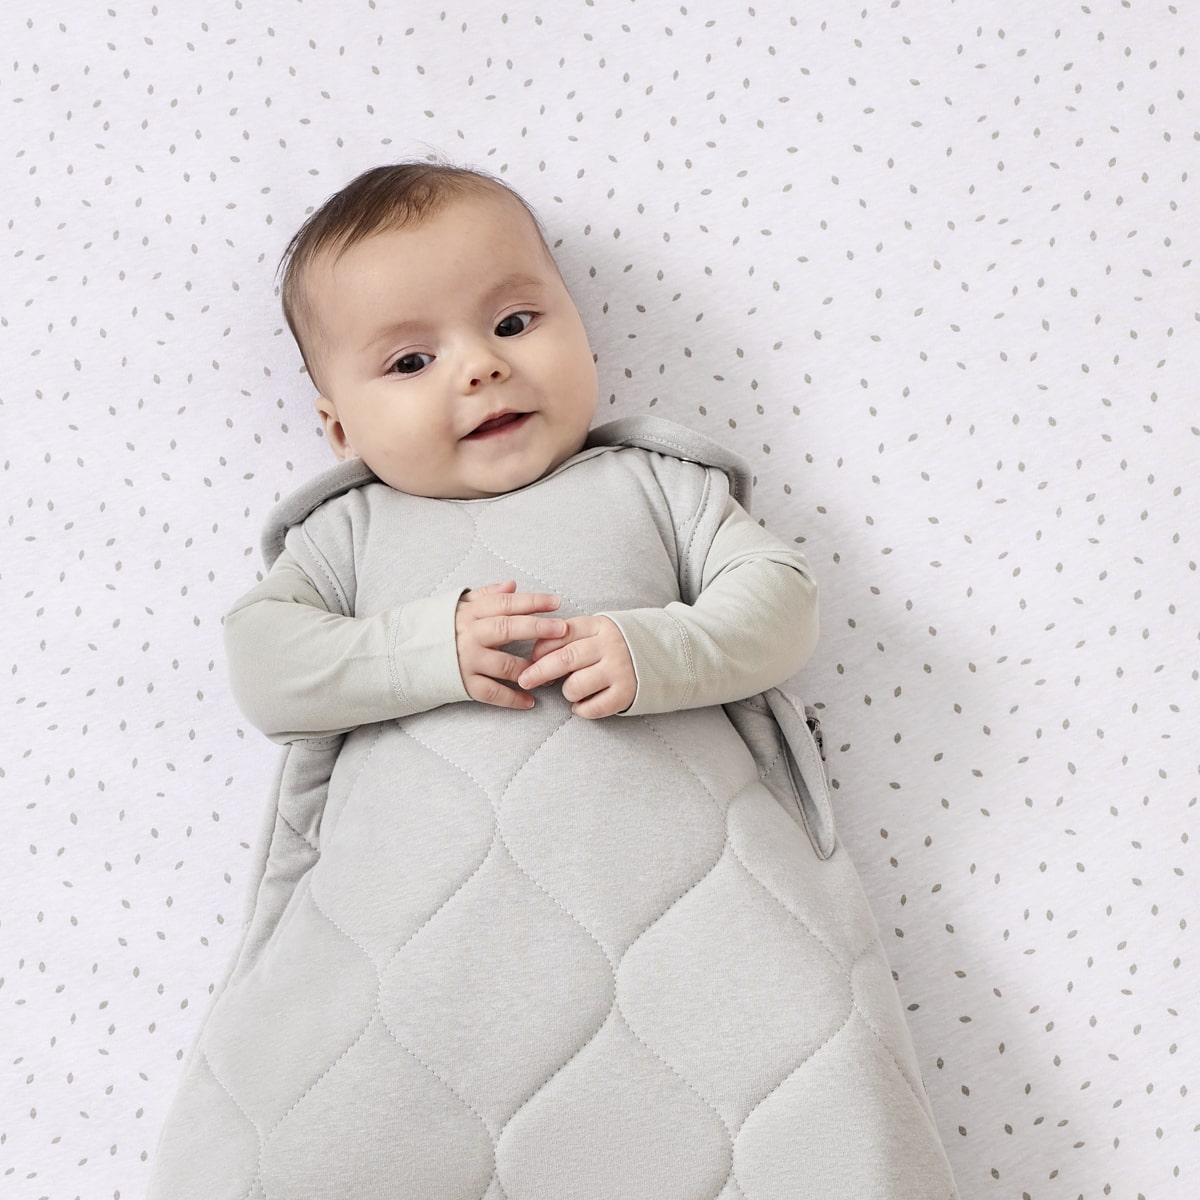 A Sleeping Bag That Grows With Your Child